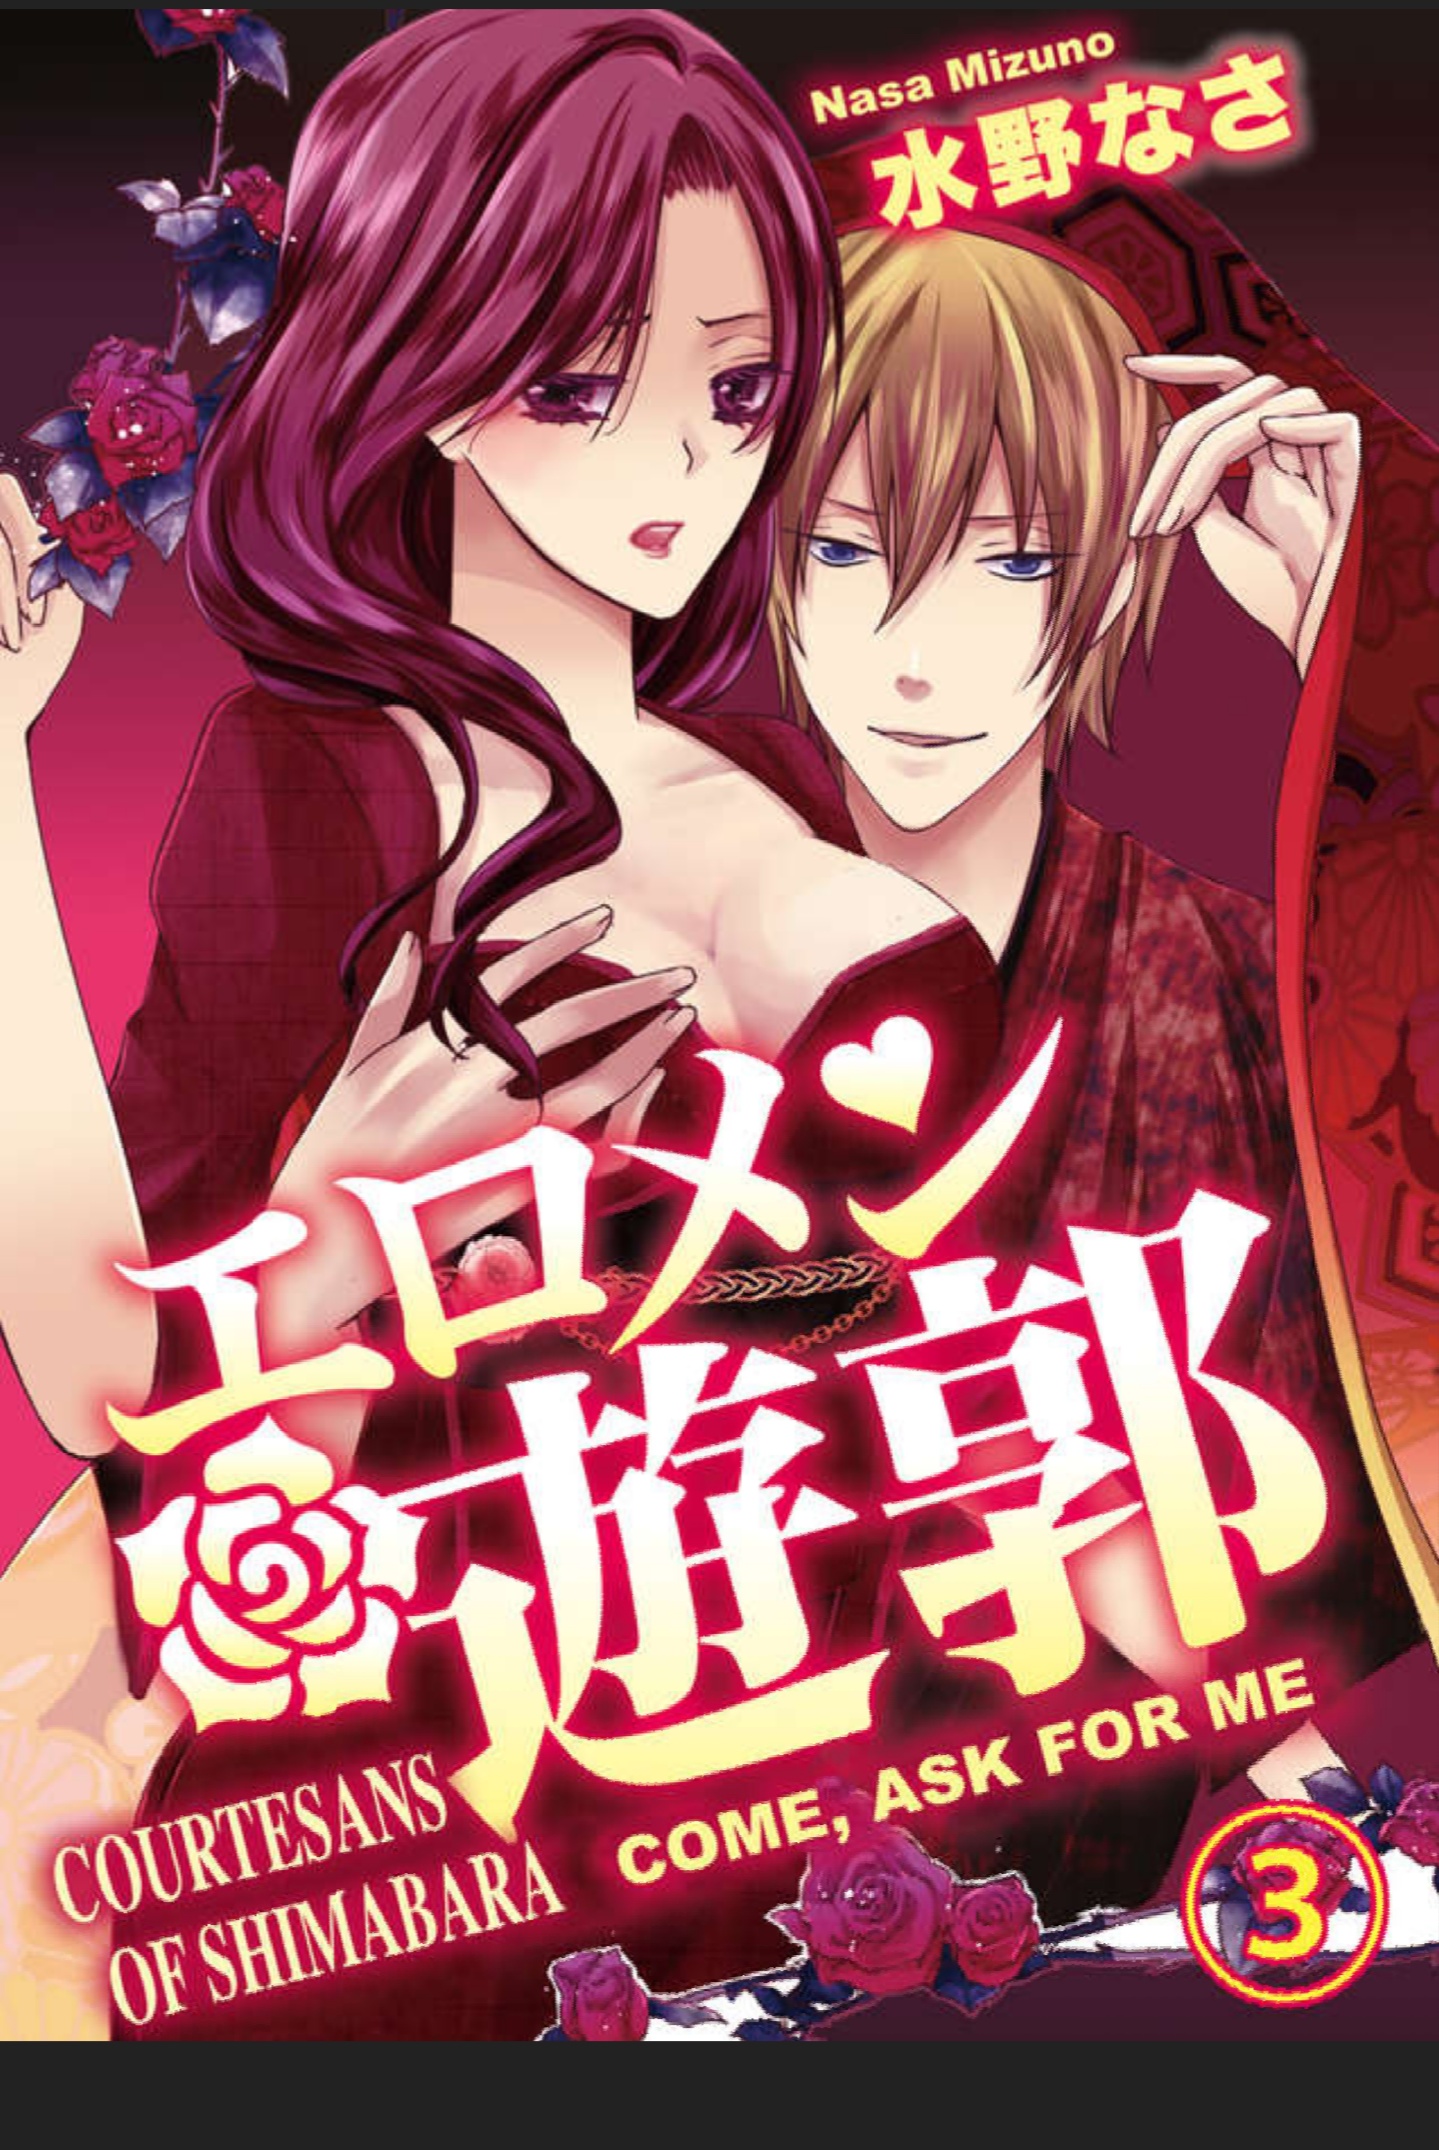 Courtesans of Shimabara - Come, Ask for Me Ch.03